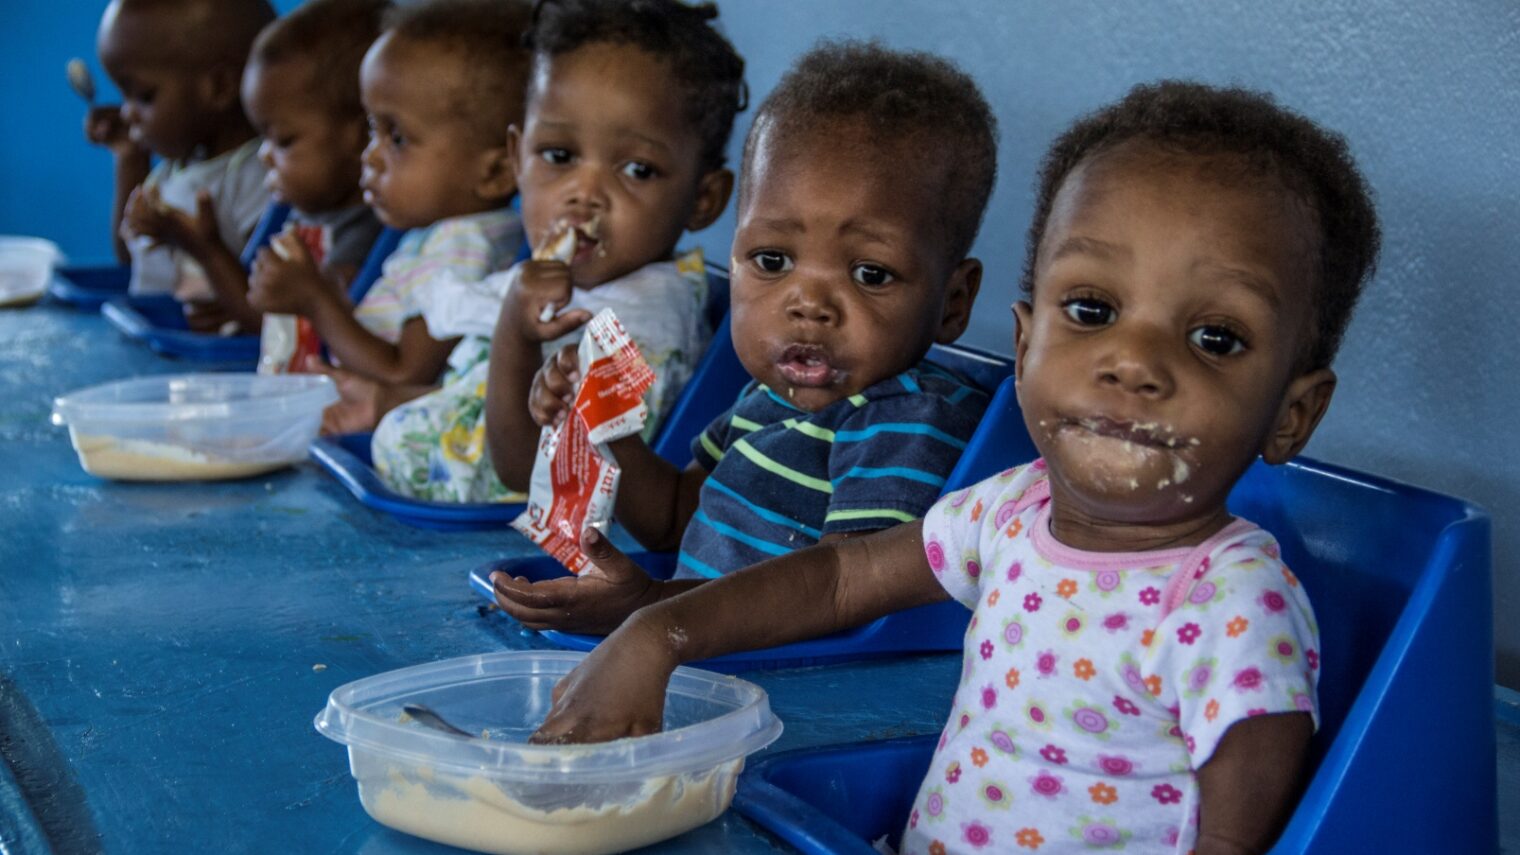 Therapeutic food purchased by 3 Million Club donors helped nourish 2,000 Haitian children. Photo: courtes